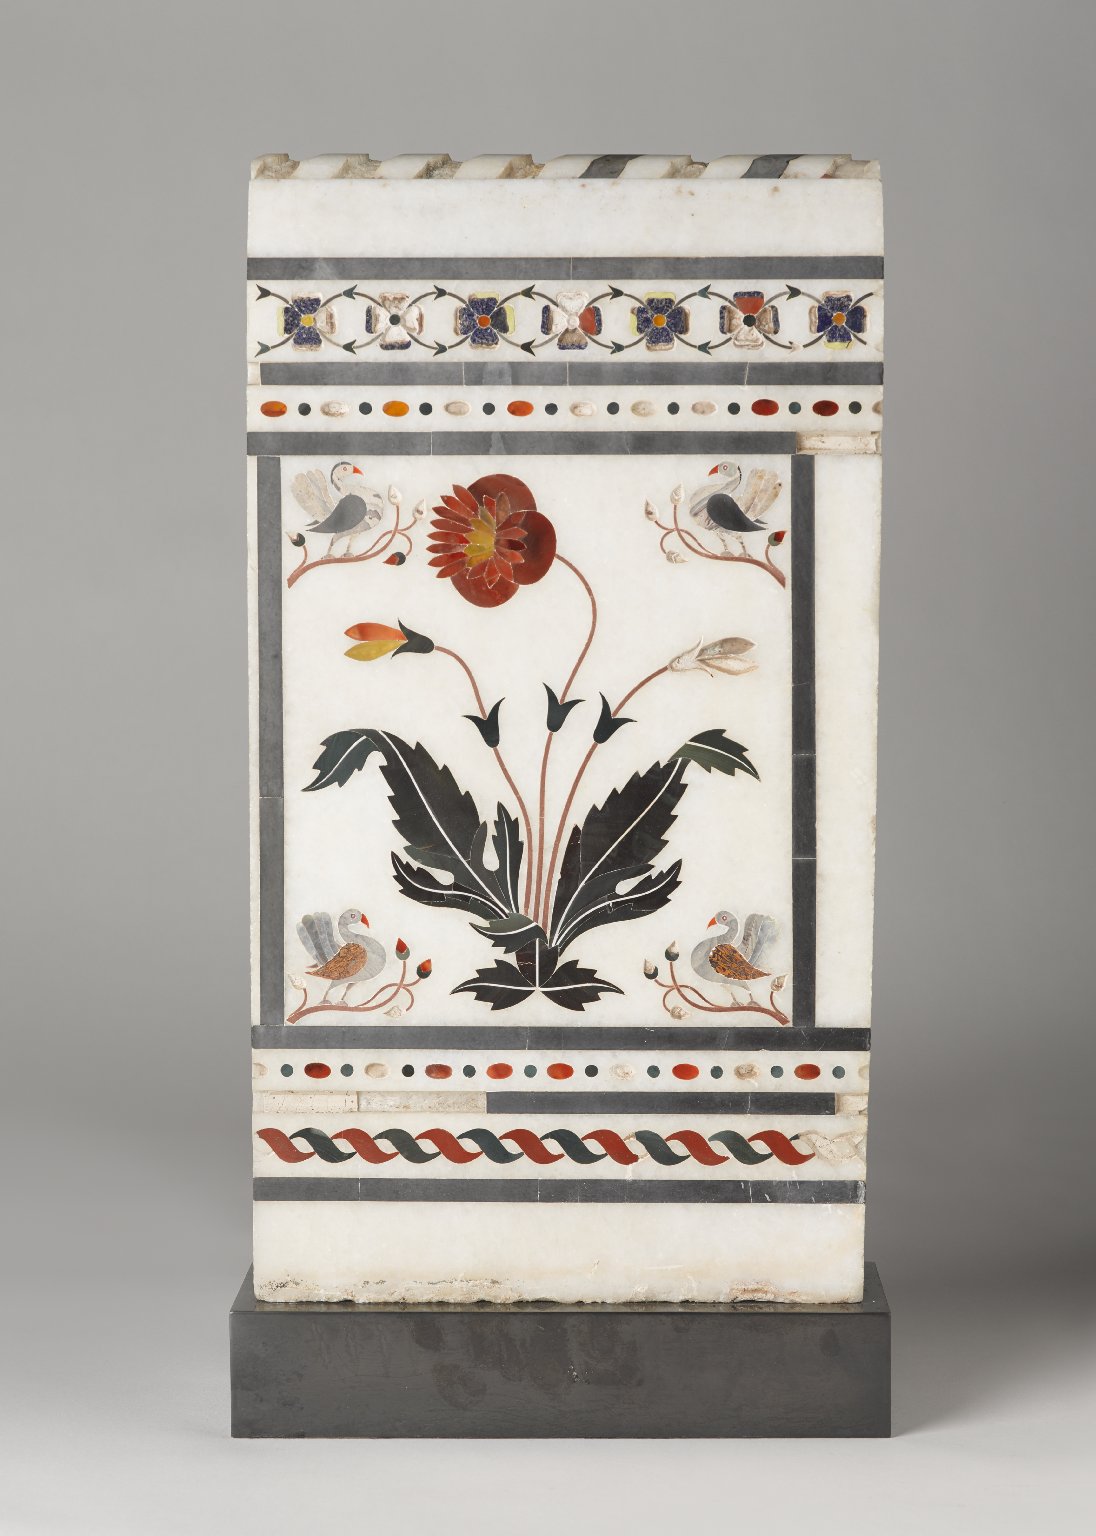 Marble pietra dura architectural fragment from a railing, with variegated semi-precious stones. Northern India, Mughal period, 18th c. Brooklyn Museum collection.jpg